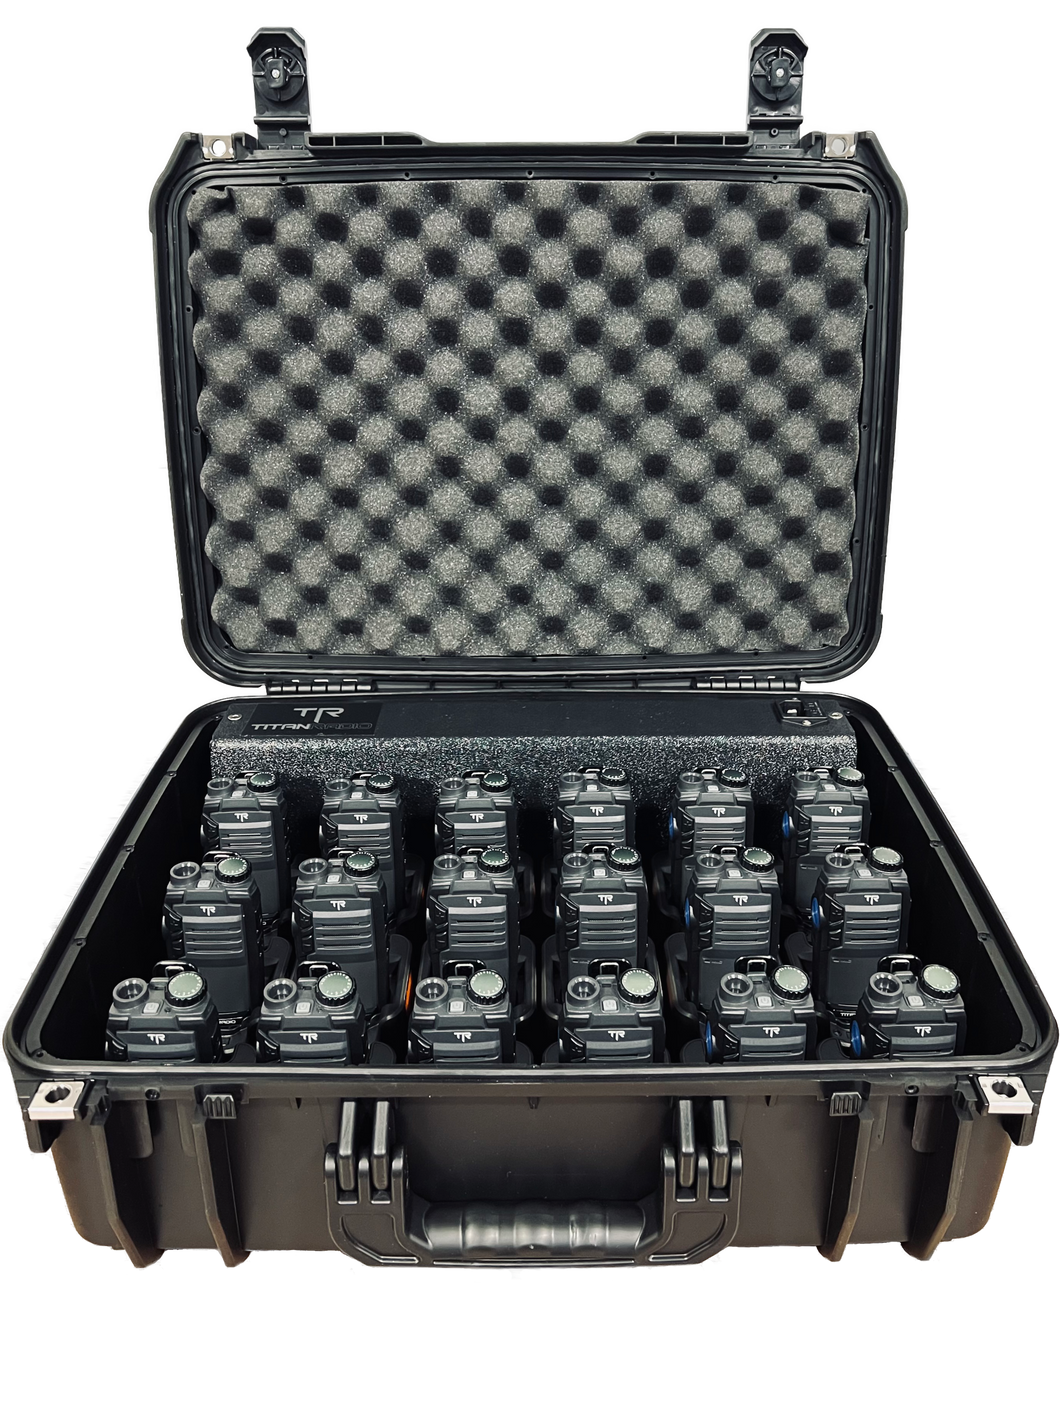 18 NEW Titan TR300 Radios + 18 Bank Charging Case (Package Deal)